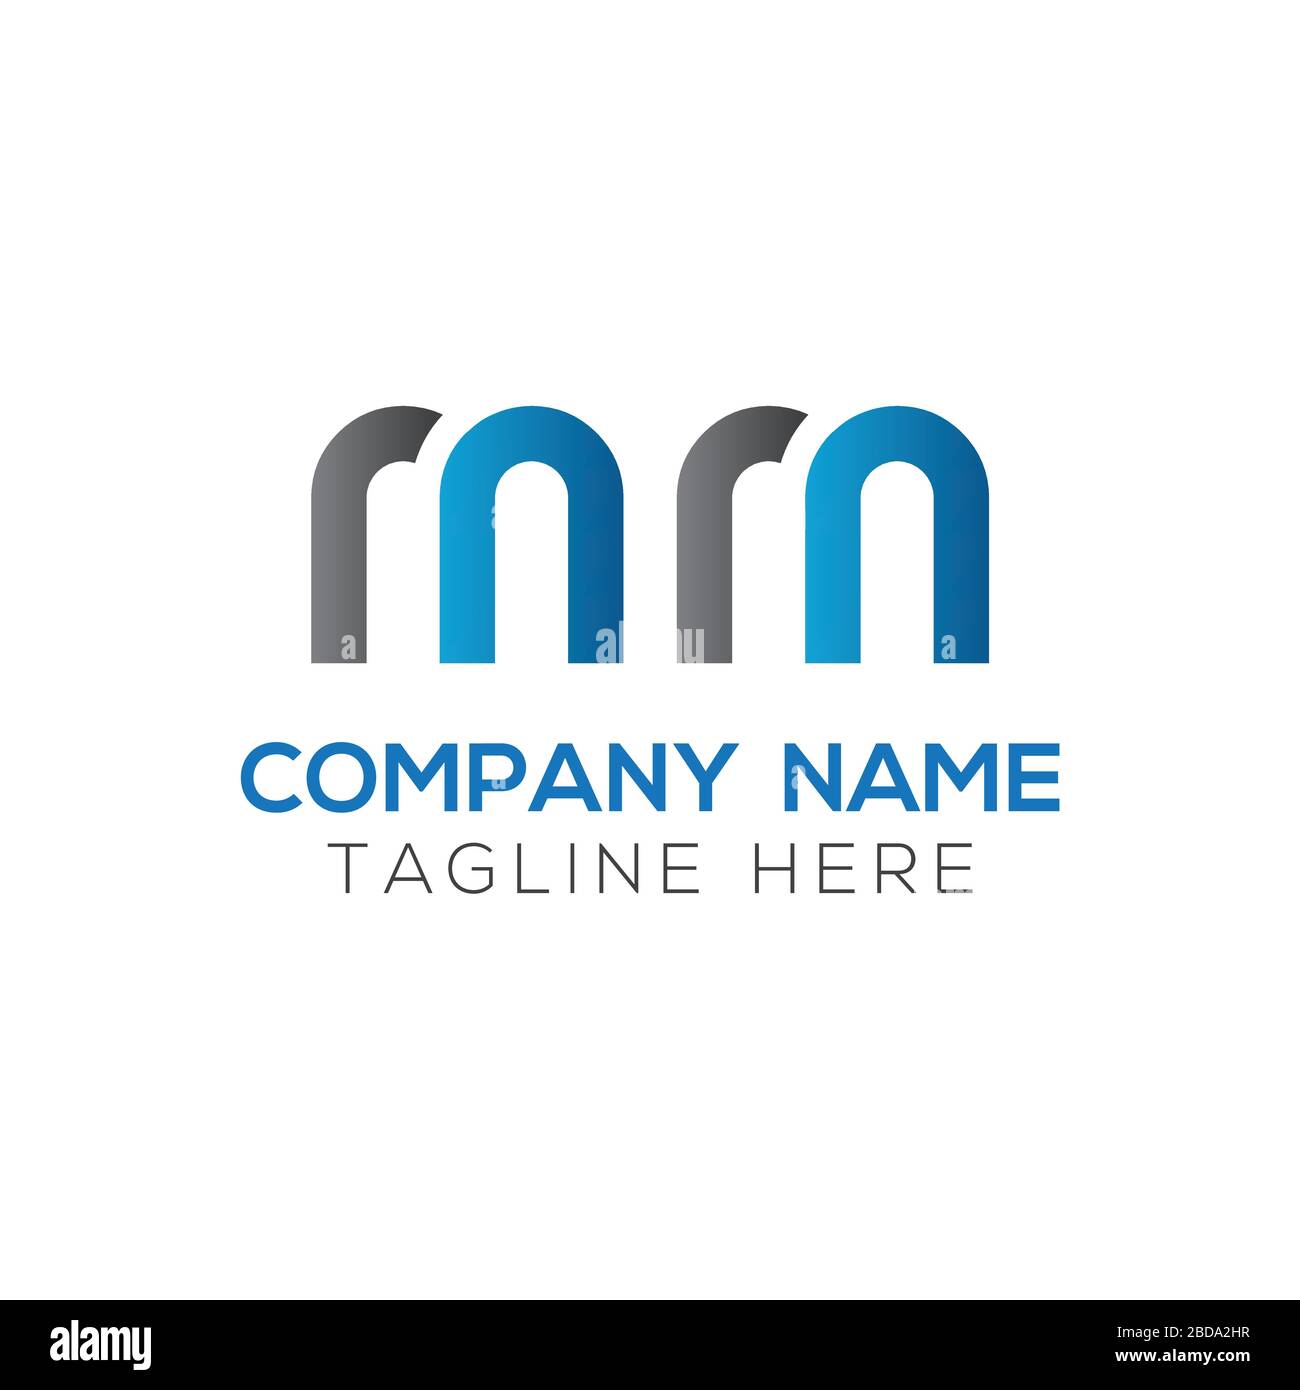 Mm Monogram Images – Browse 6,026 Stock Photos, Vectors, and Video